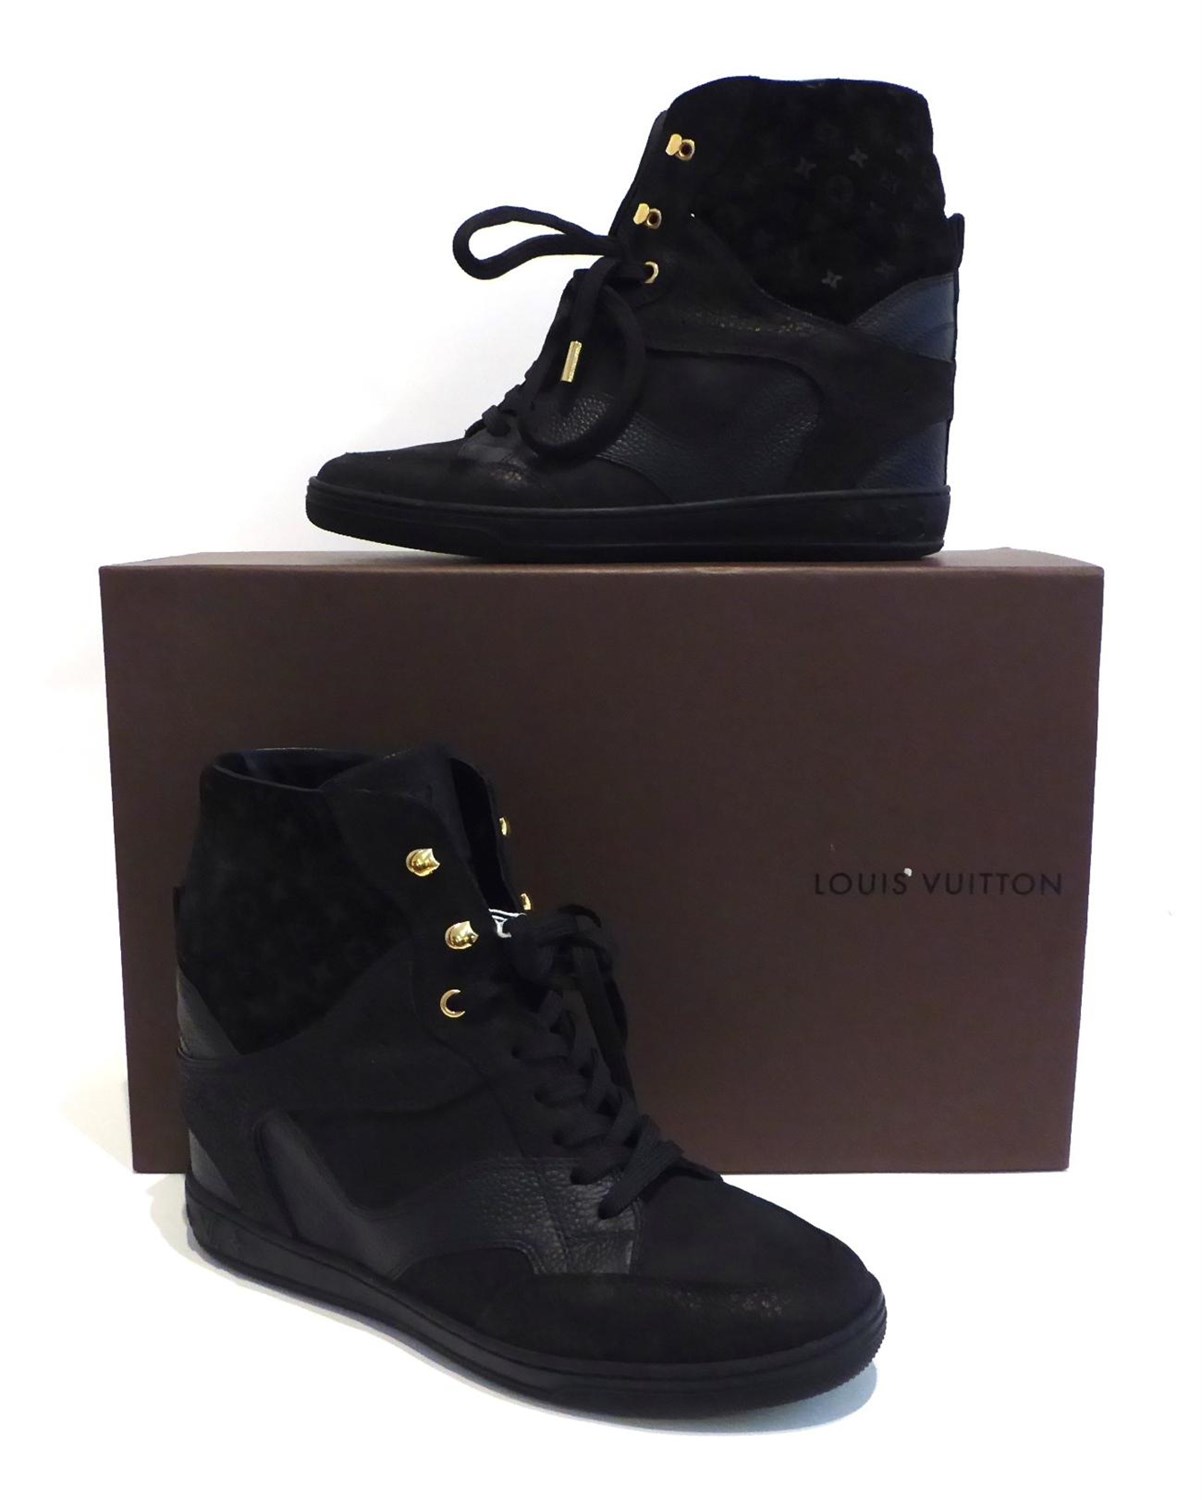 Lot 2137 - A Pair of Louis Vuitton Black Suede Calf Leather Millennium Wedge Sneakers / High Tops, with LV...